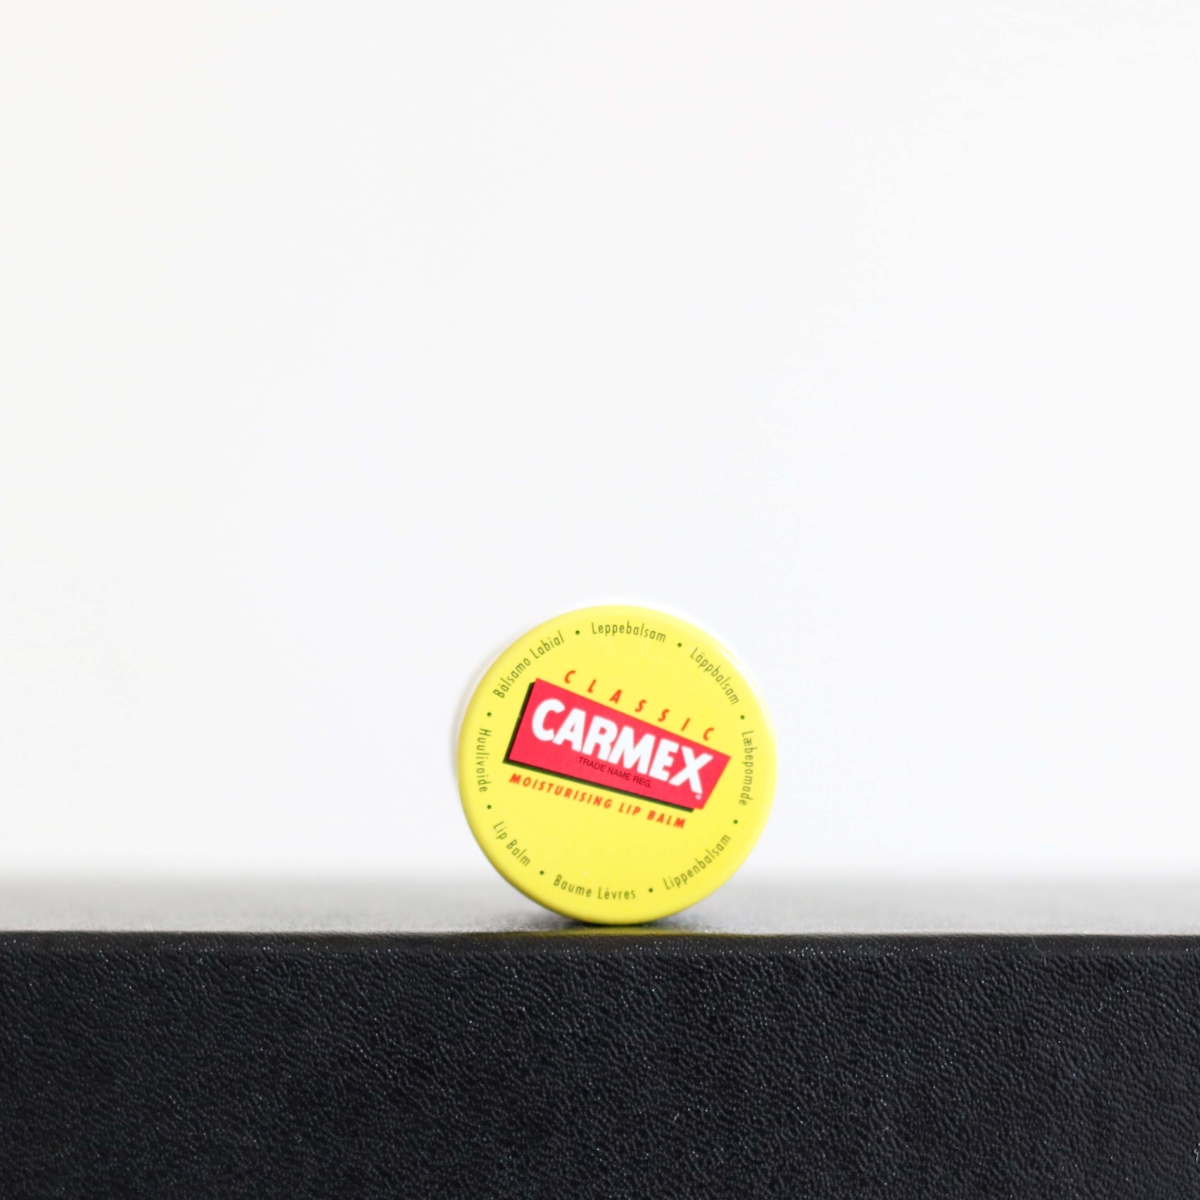 Latest in Beauty Build Your Own Box Review - Camex Lip Balm